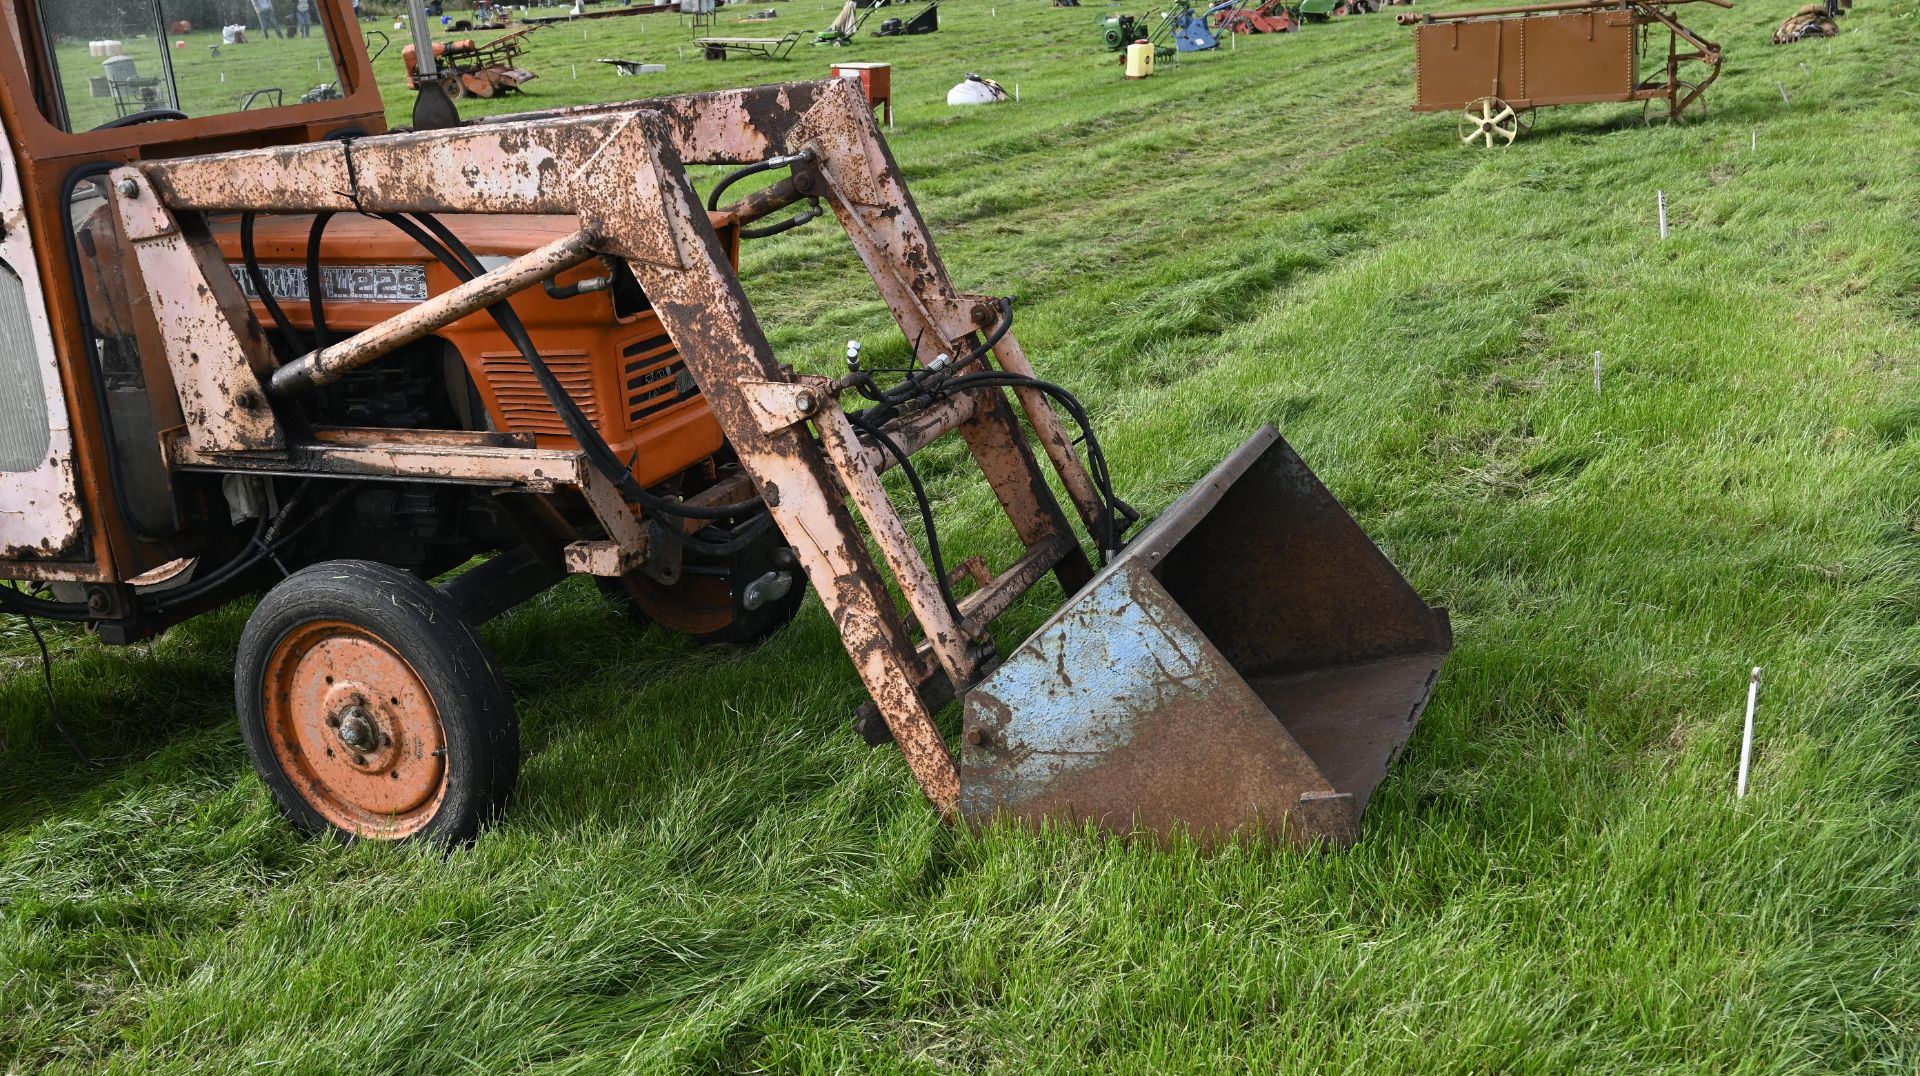 Kubota L225 tractor 1980, engine recently rebuilt and with new front tyres - Image 2 of 2